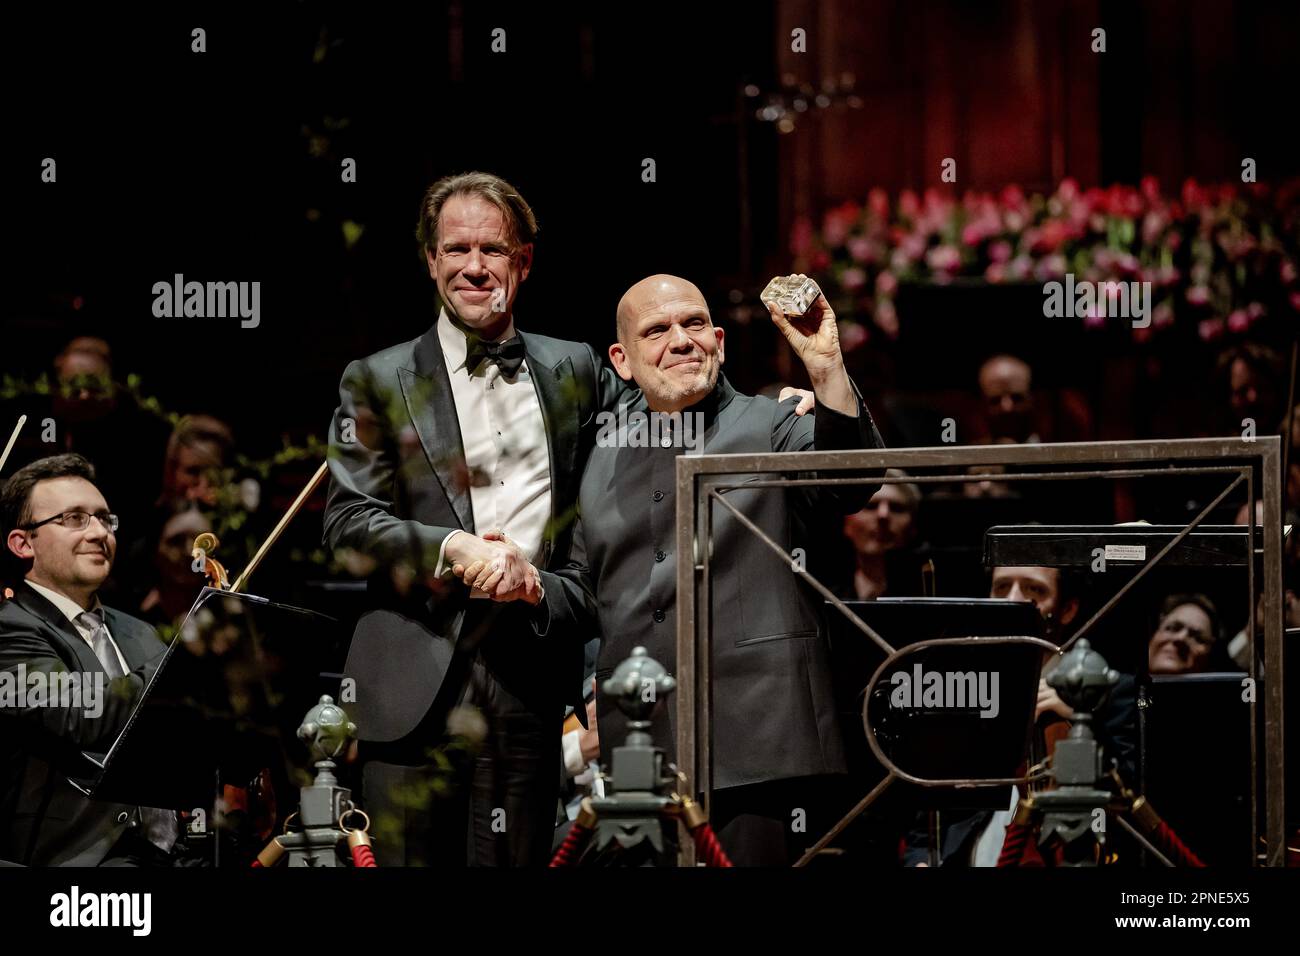 AMSTERDAM - Conductor Jaap van Zweden during the presentation of the Concertgebouw Prize for his contribution to the artistic profile of the Concertgebouw. At the age of 19, the 62-year-old Van Zweden became the youngest ever concertmaster of the Concertgebouworkest. ANP ROBIN VAN LONKHUIJSEN netherlands out - belgium out Stock Photo